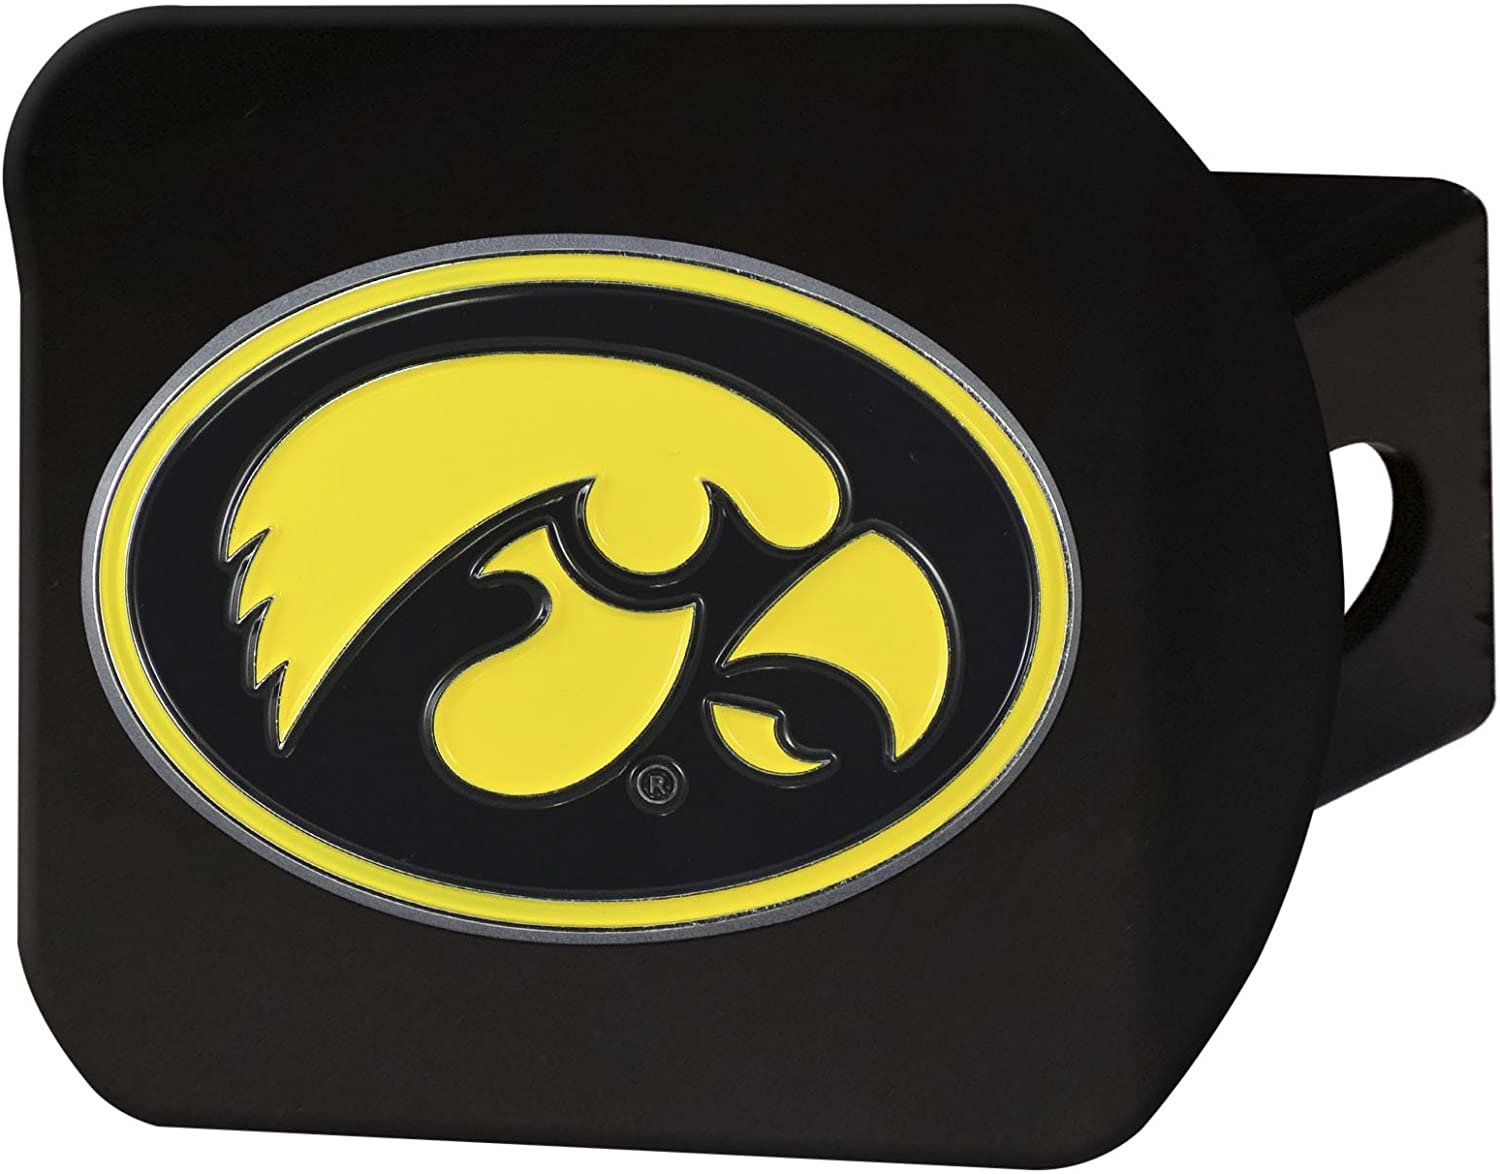 Iowa Hawkeyes Solid Metal Black Hitch Cover with Color Metal Emblem 2 Inch Square Type III University of